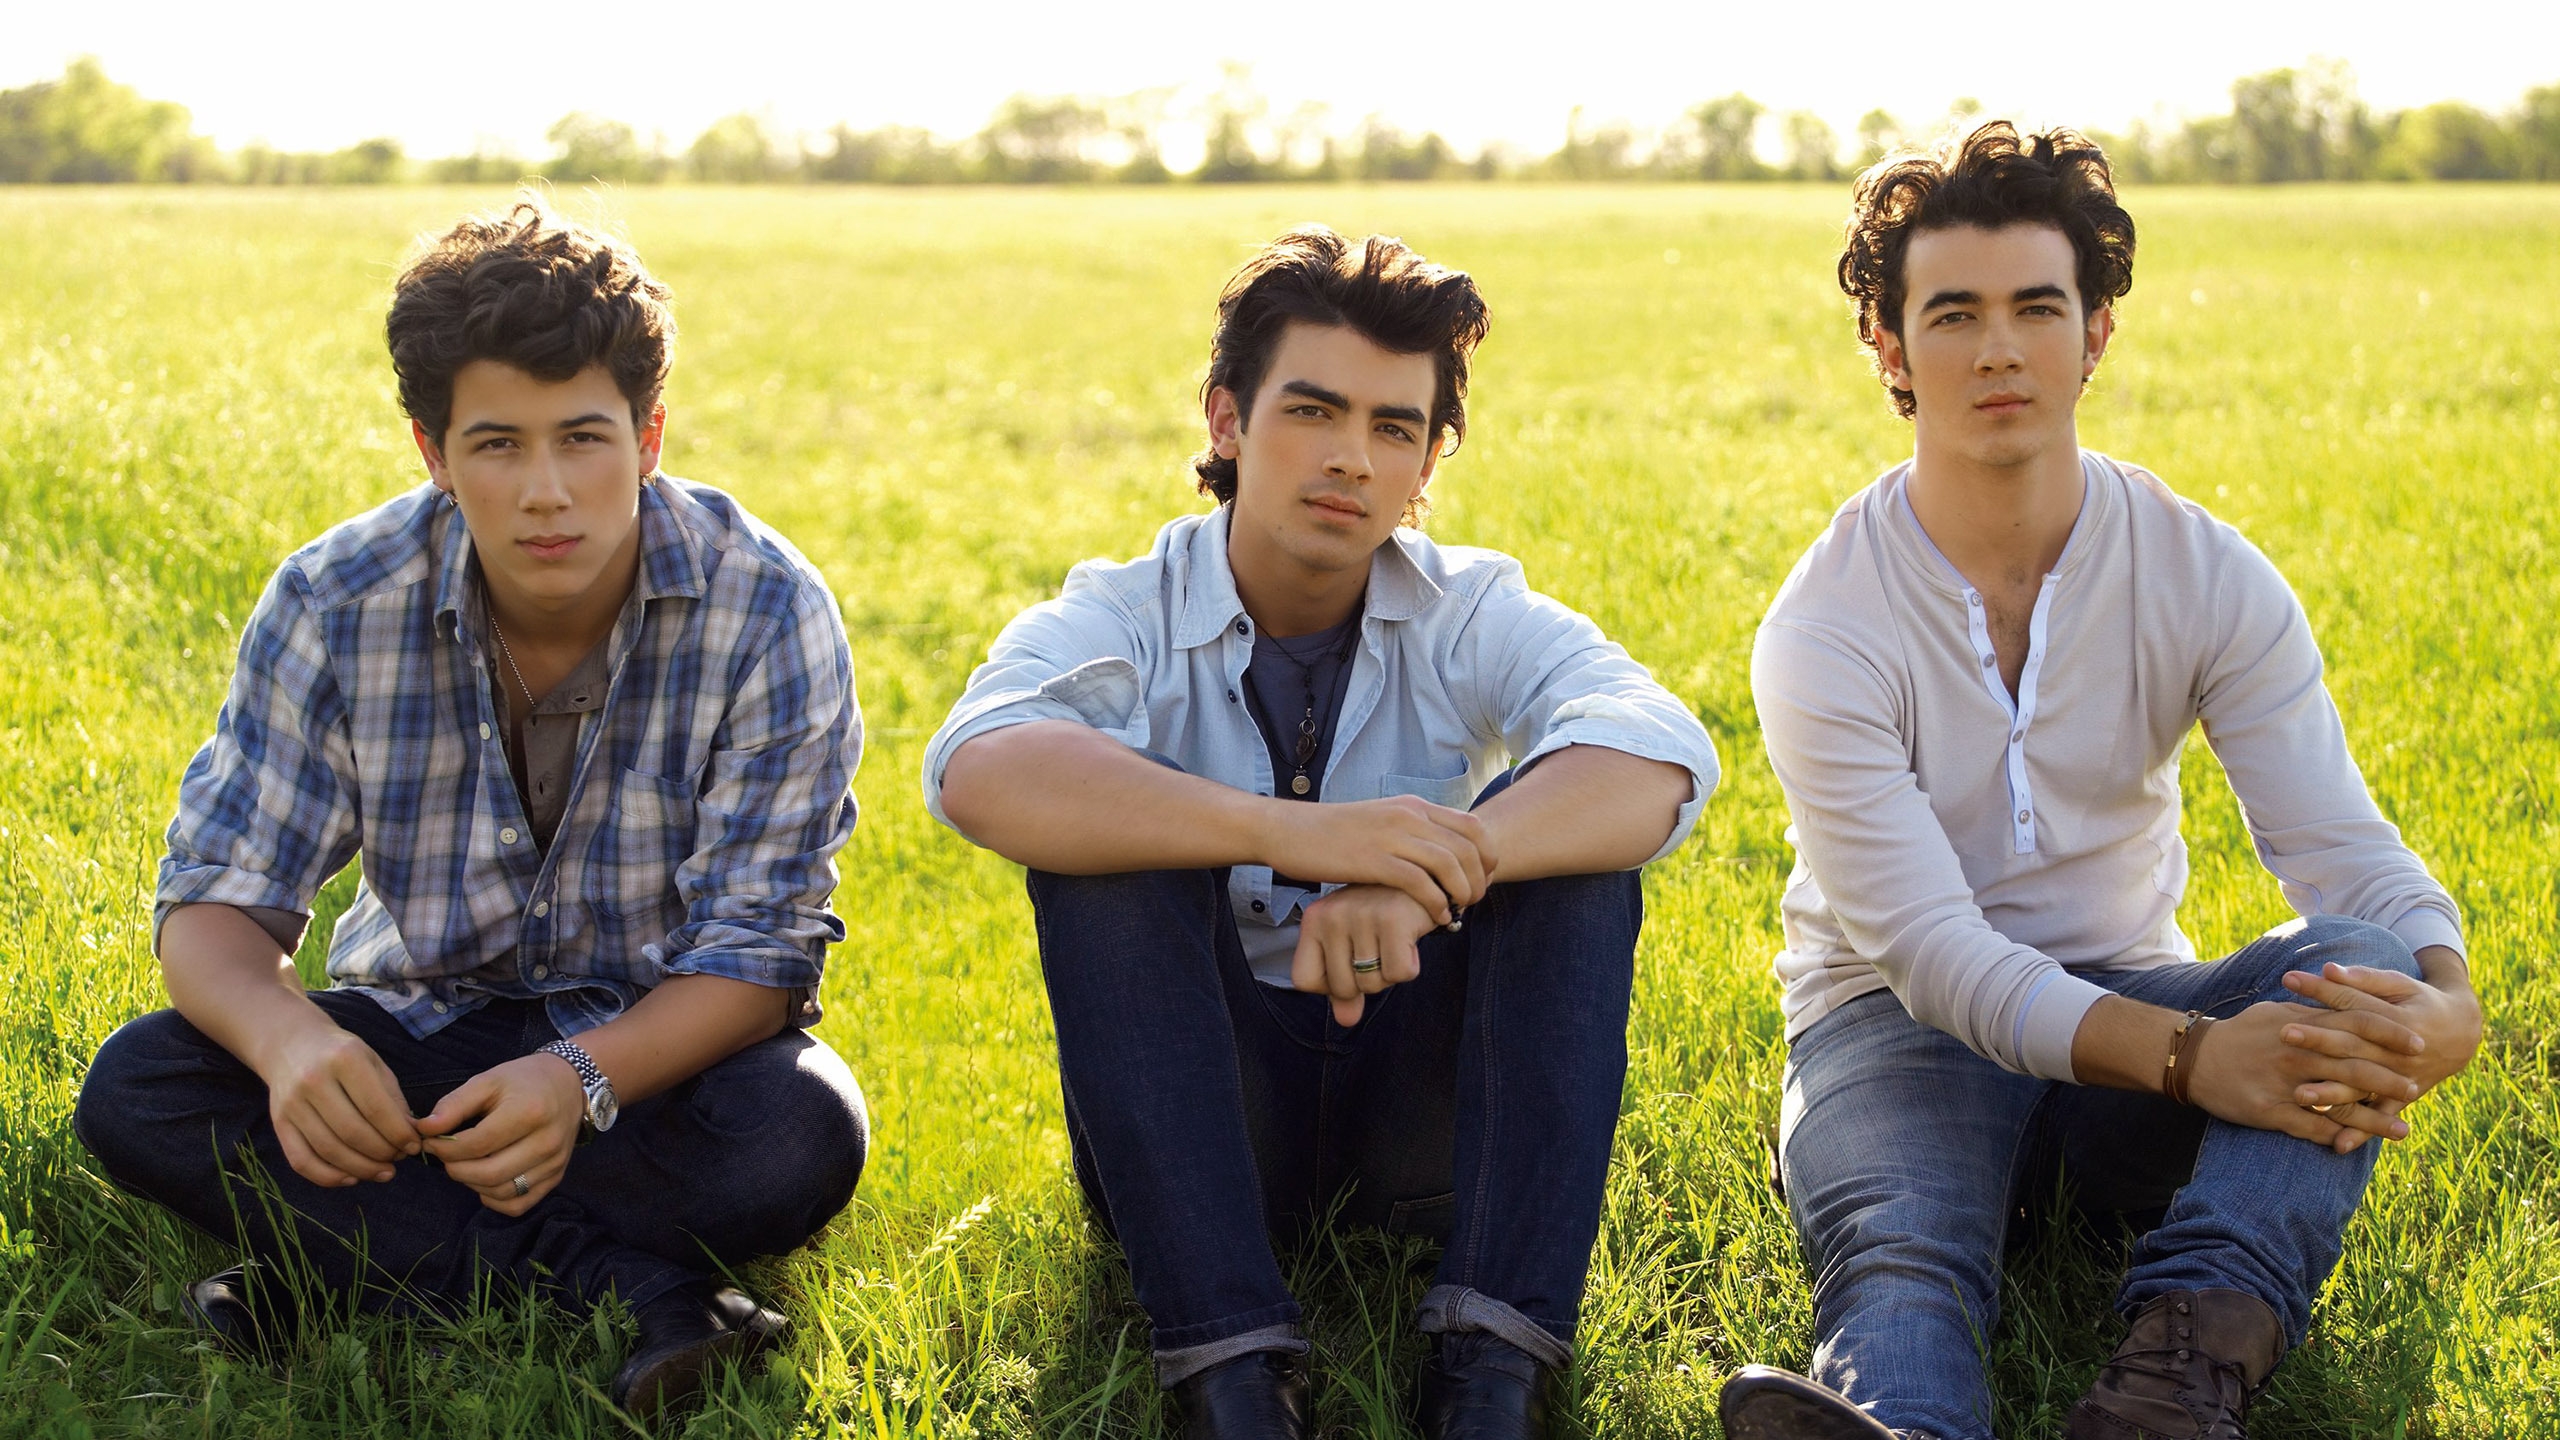 Jonas Brothers Band for 2560x1440 HDTV resolution